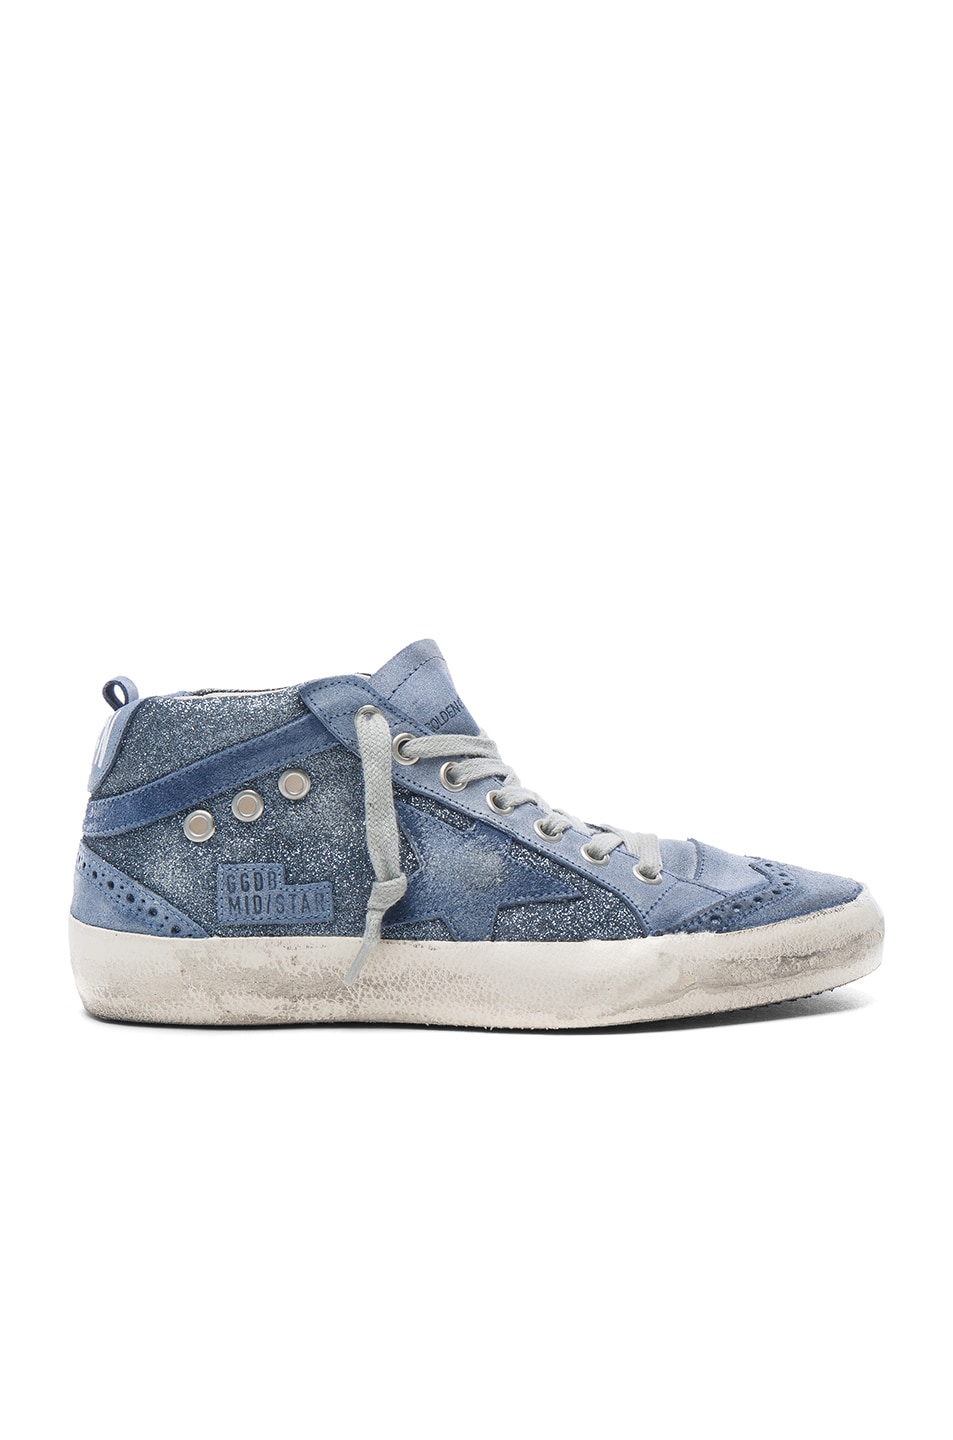 Image 1 of Golden Goose Leather Mid Star Sneakers in Blue Glitter